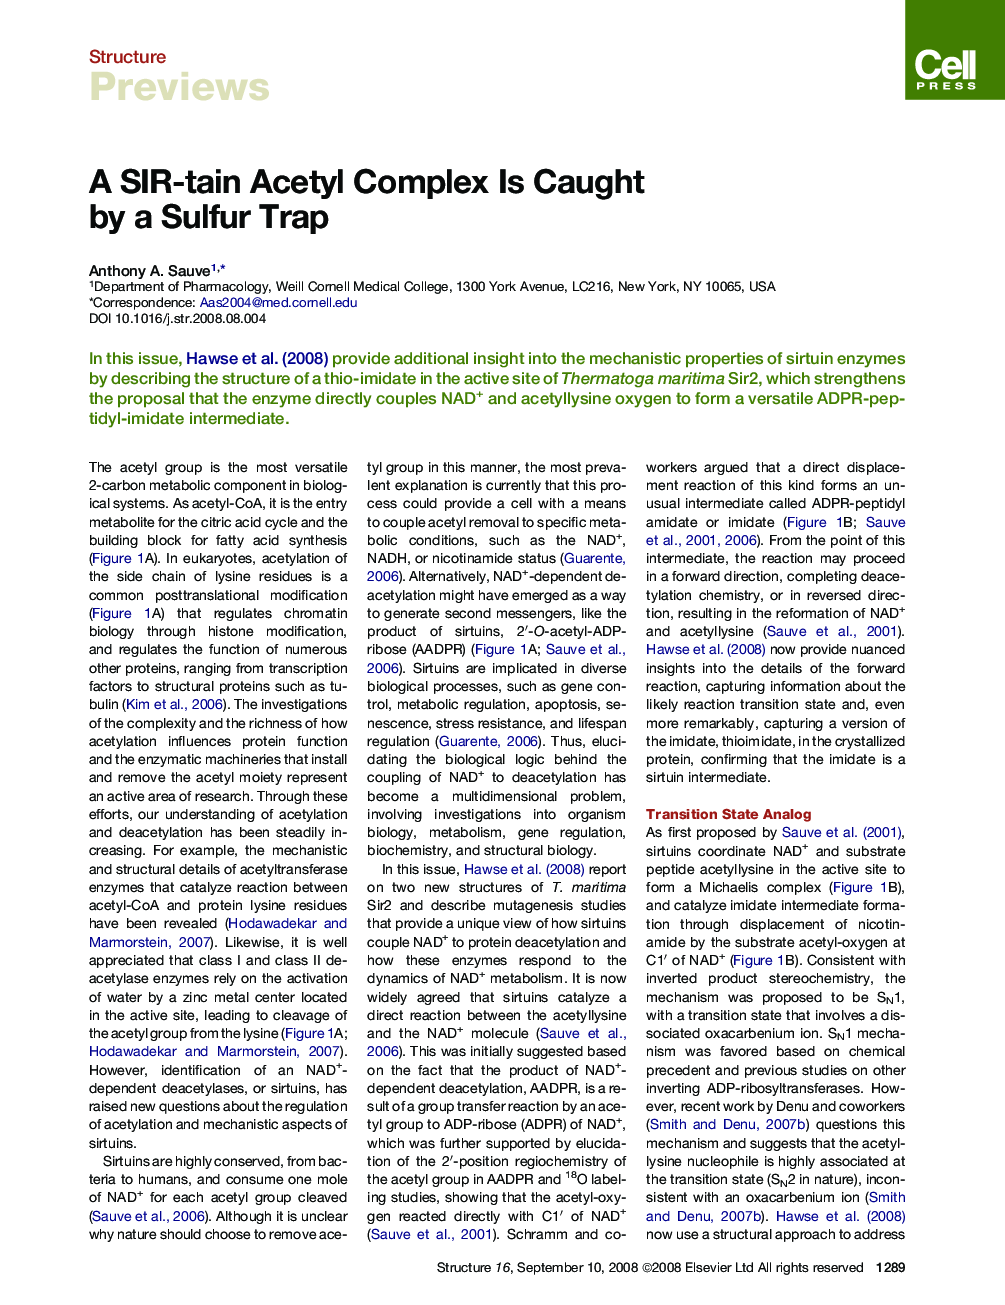 A SIR-tain Acetyl Complex Is Caught by a Sulfur Trap